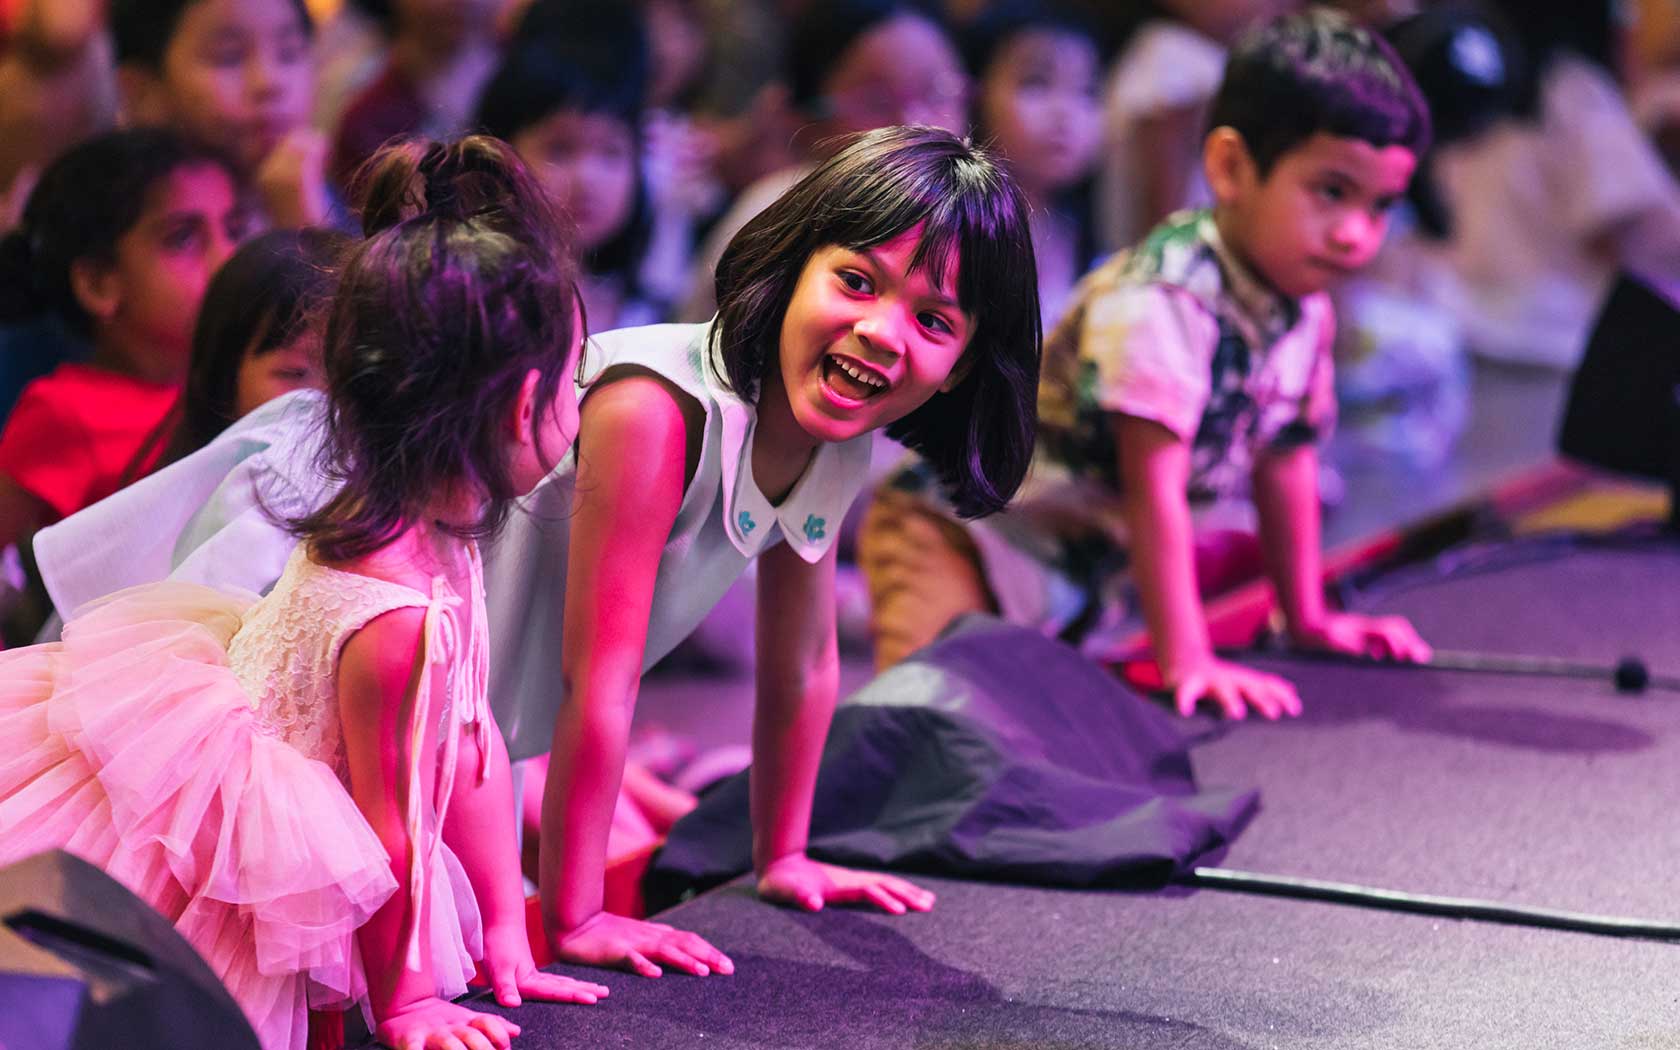 Image of children having fun near the stage during a performance